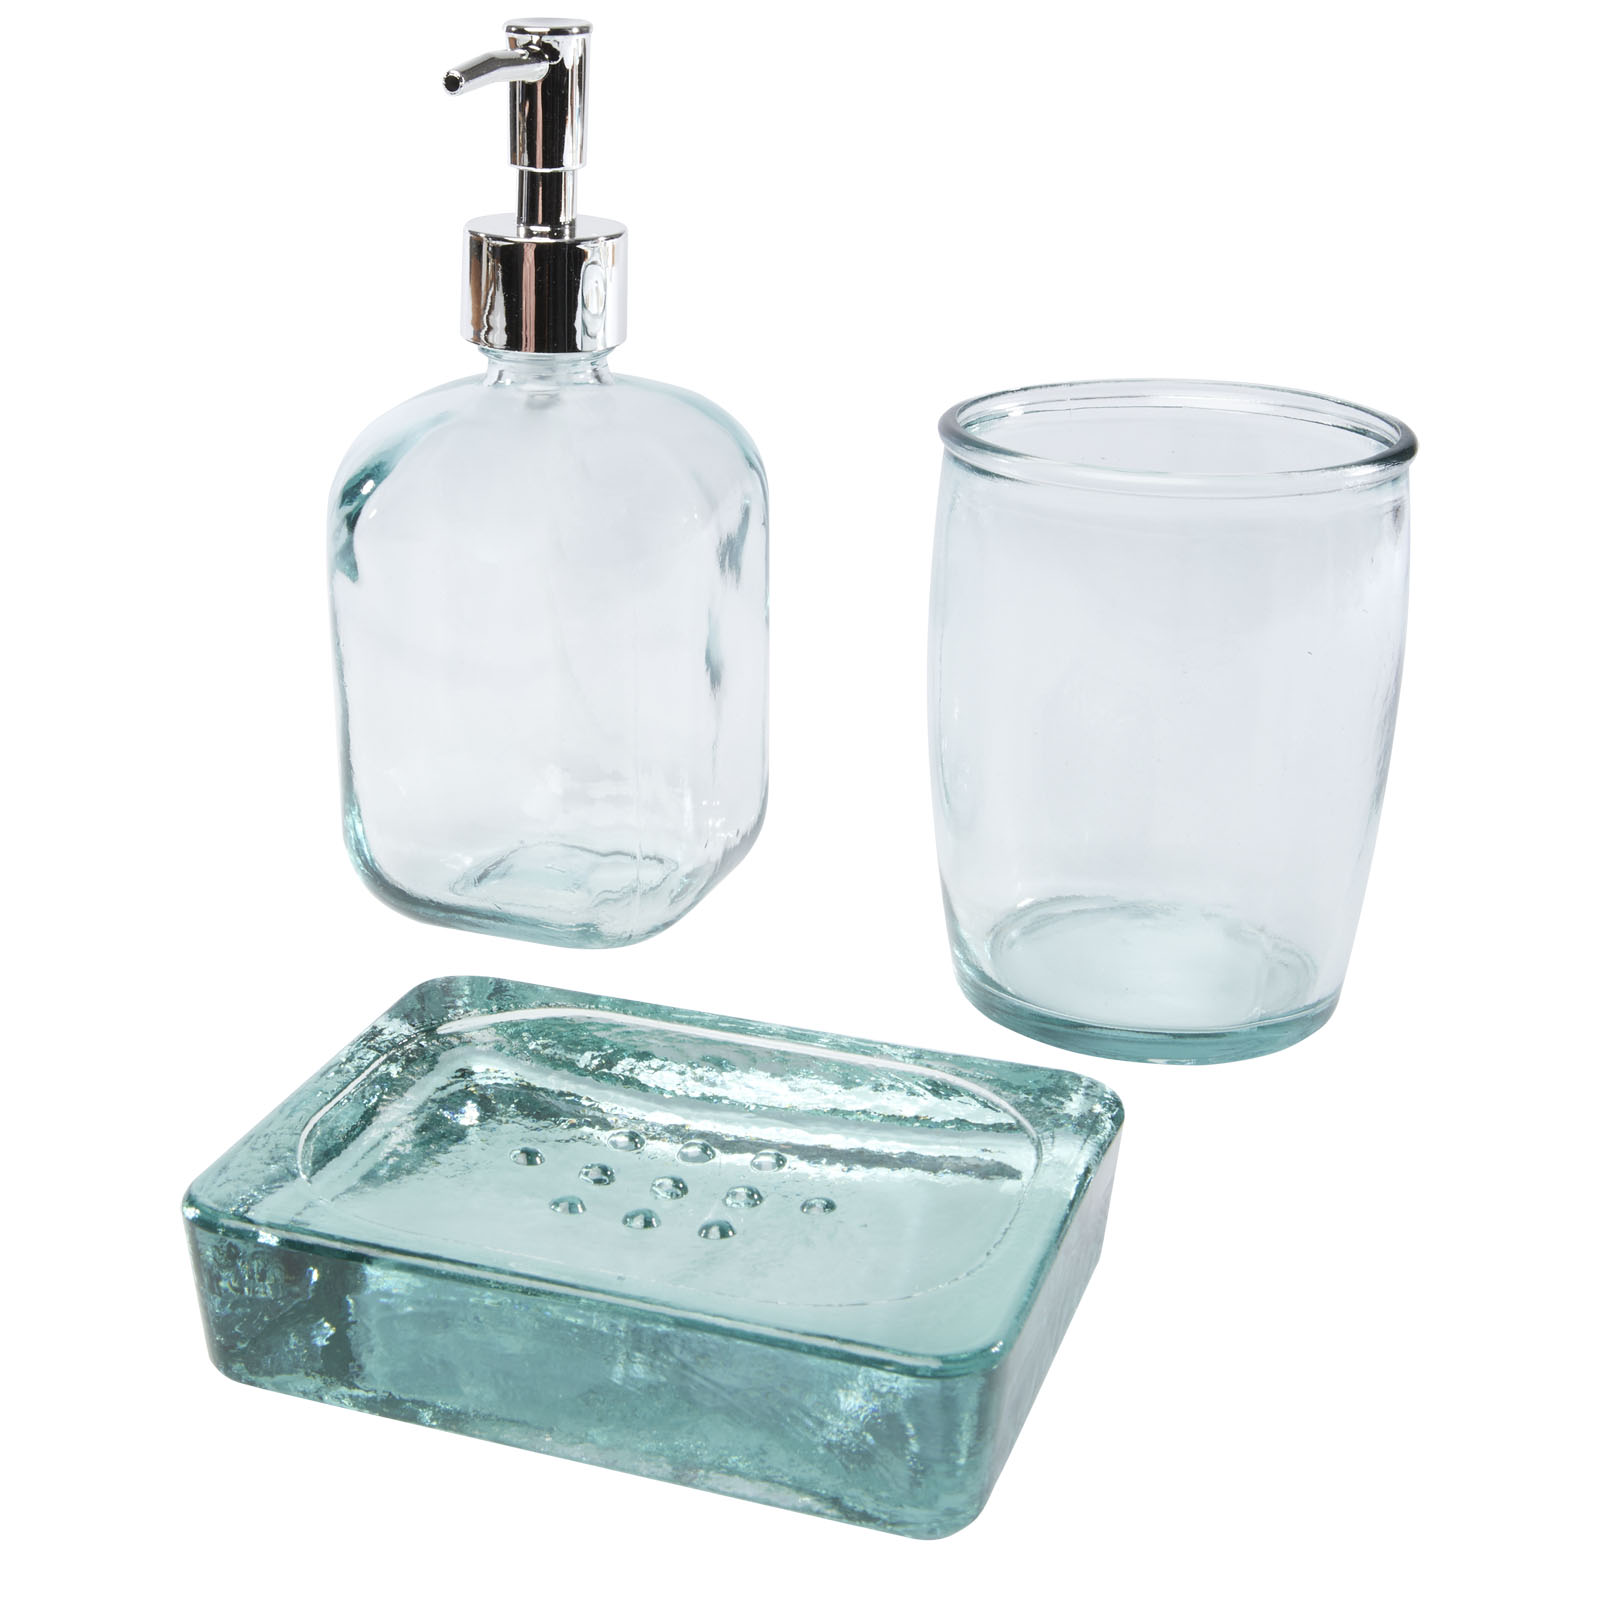 Advertising Home Accessories - Jabony 3-piece recycled glass bathroom set